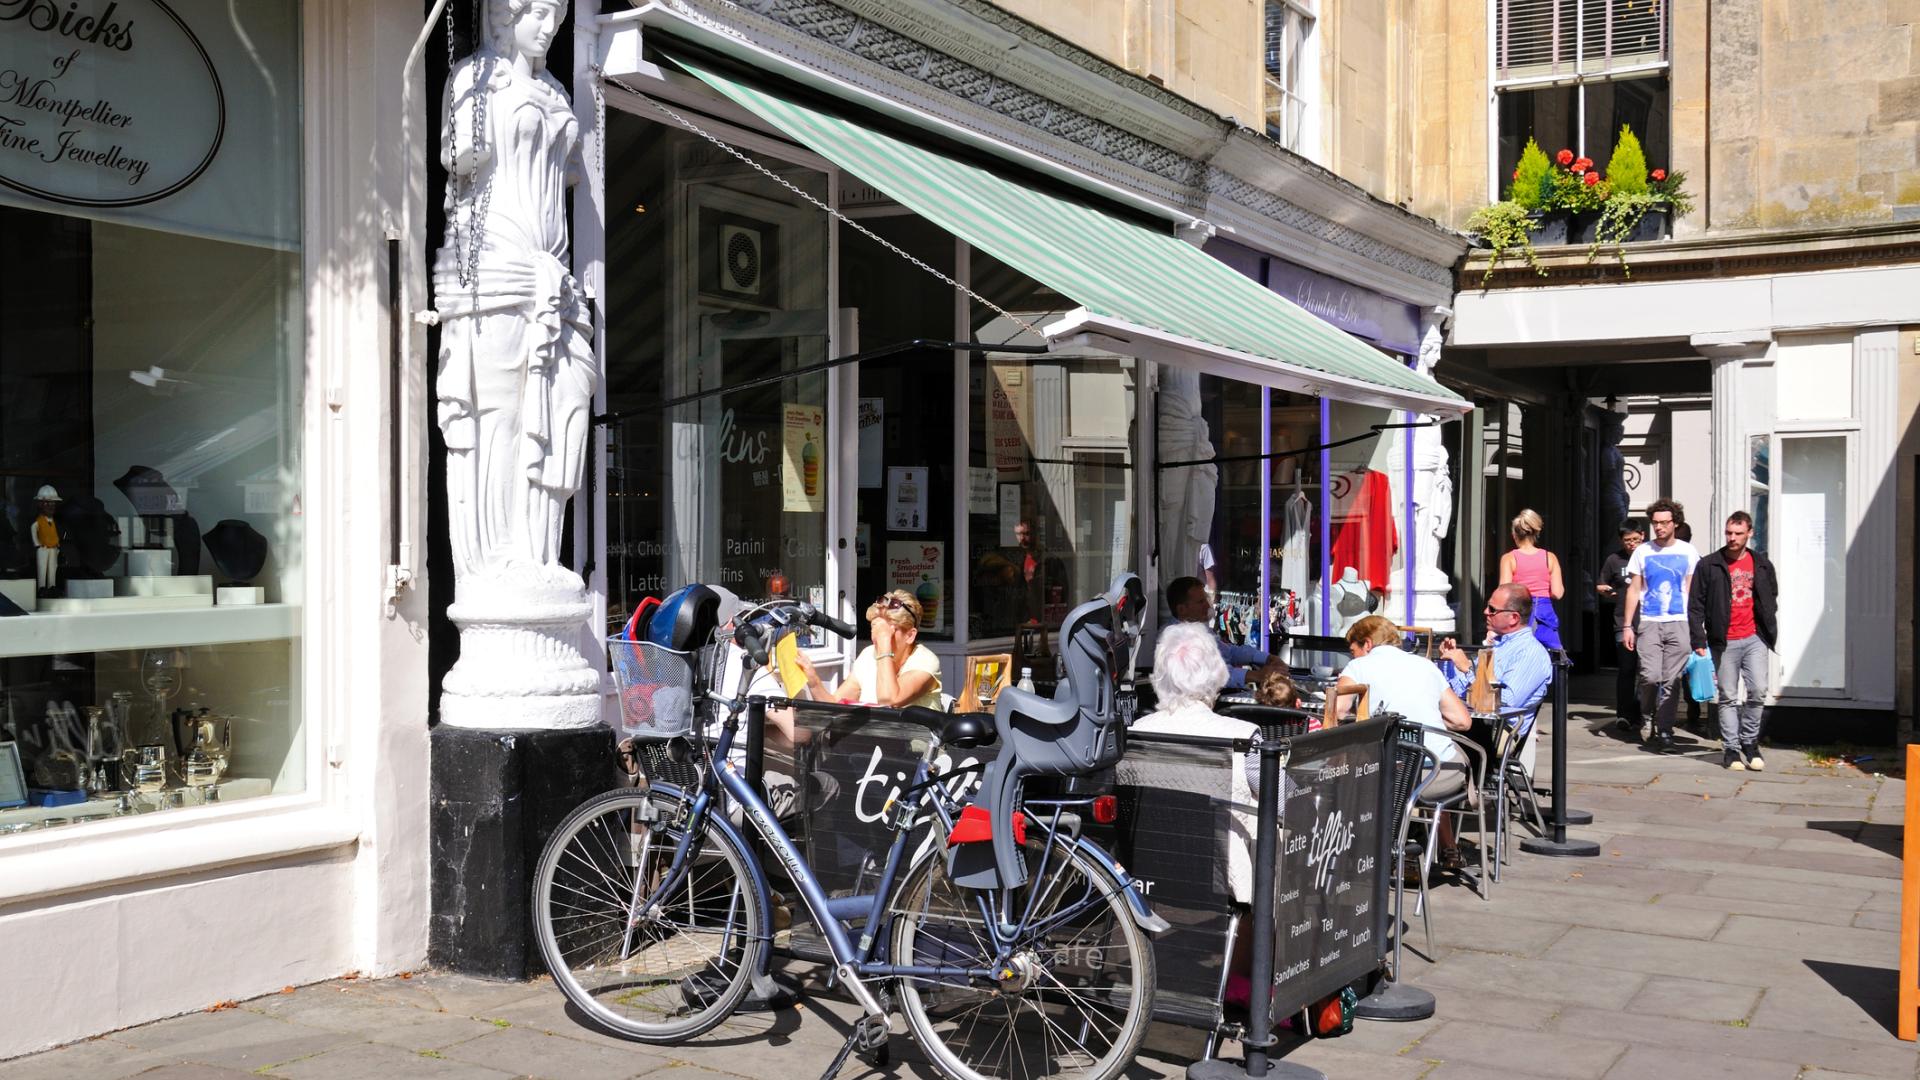 Street view of outdoor cafe tables with bike parked in foreground, people having coffee in sunshine